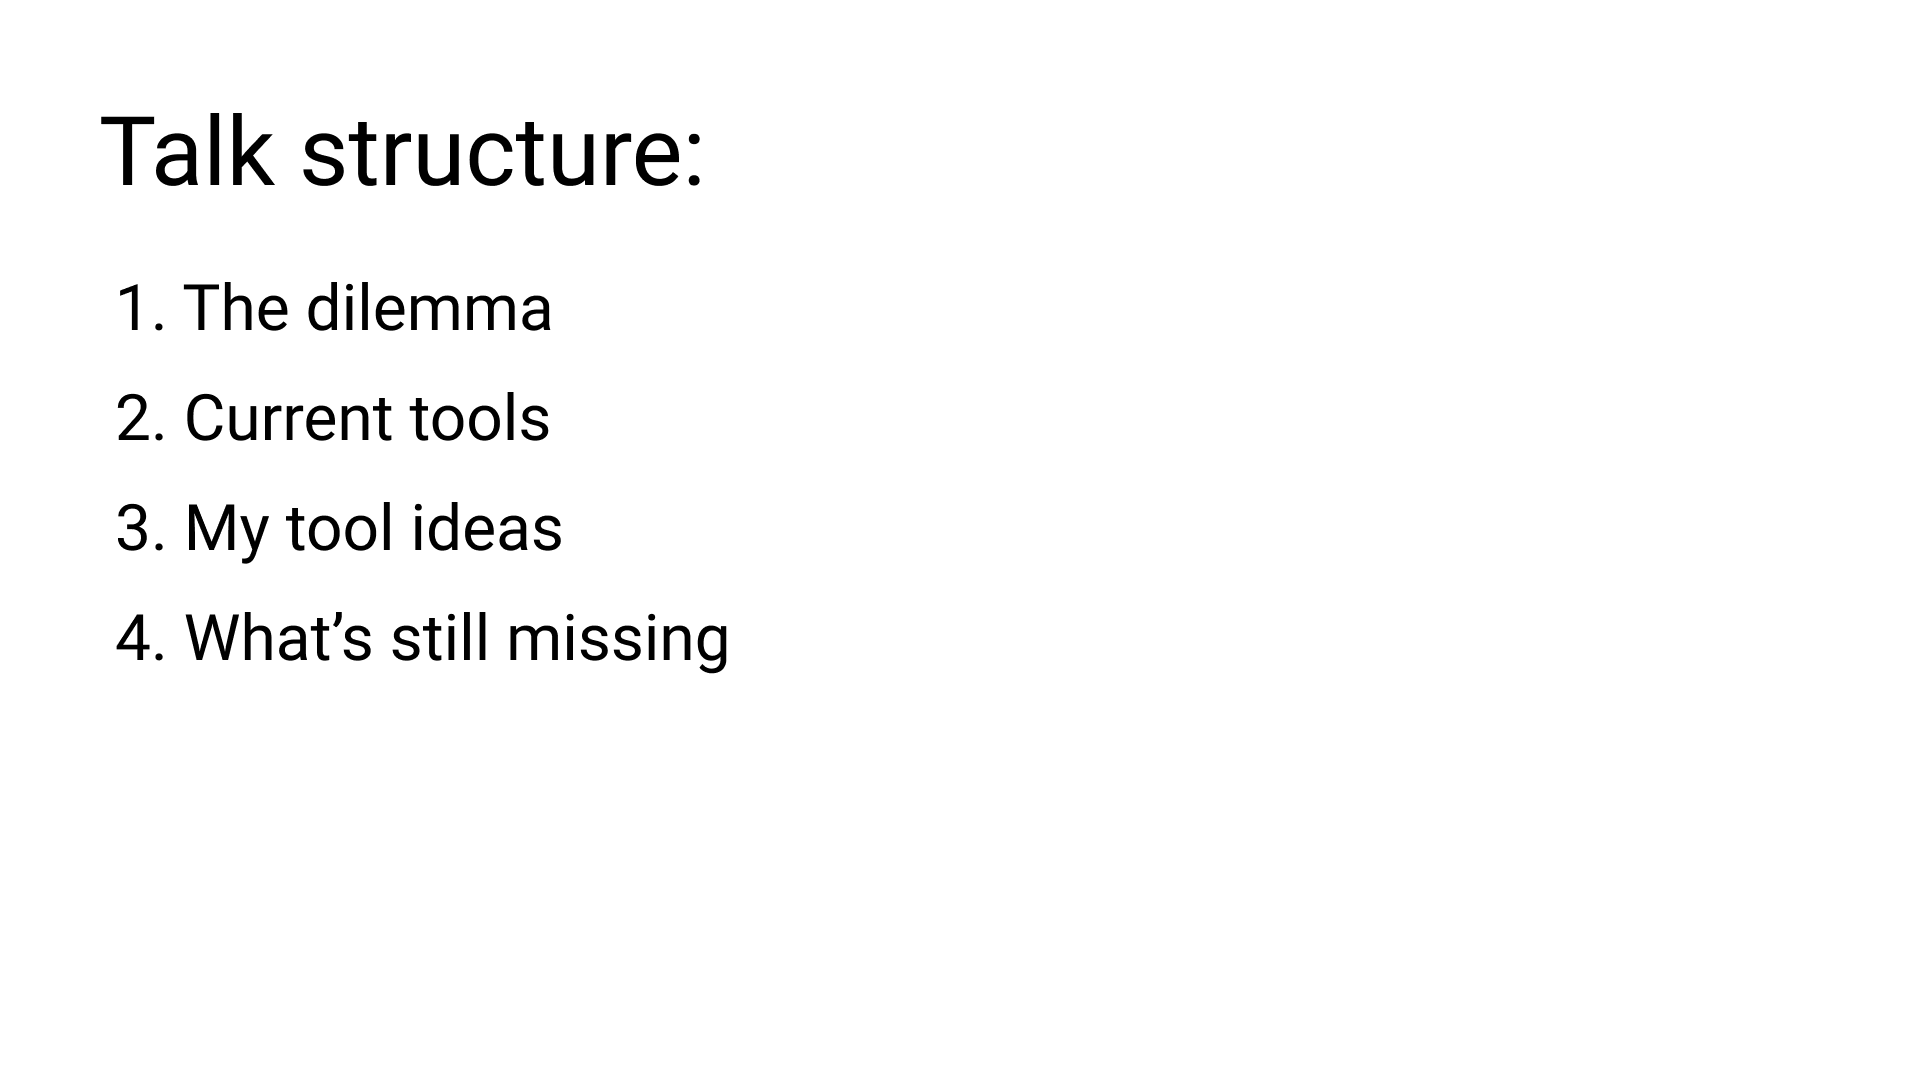 Talk structure: 1. The dilemma. 2. Current tools. 3. My tool ideas. 4. What's still missing.